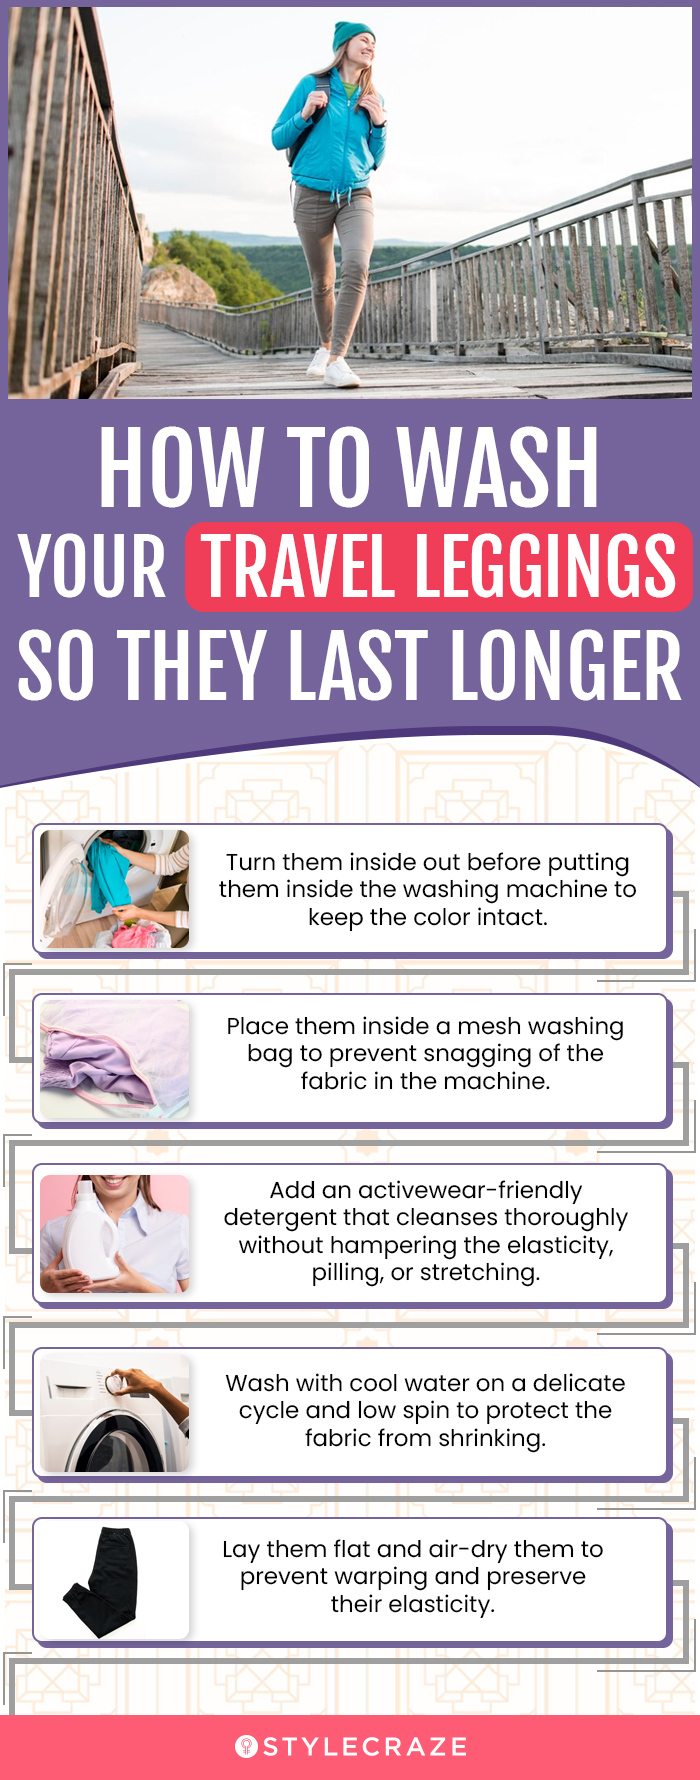 How To Wash Your Travel Leggings (infographic)